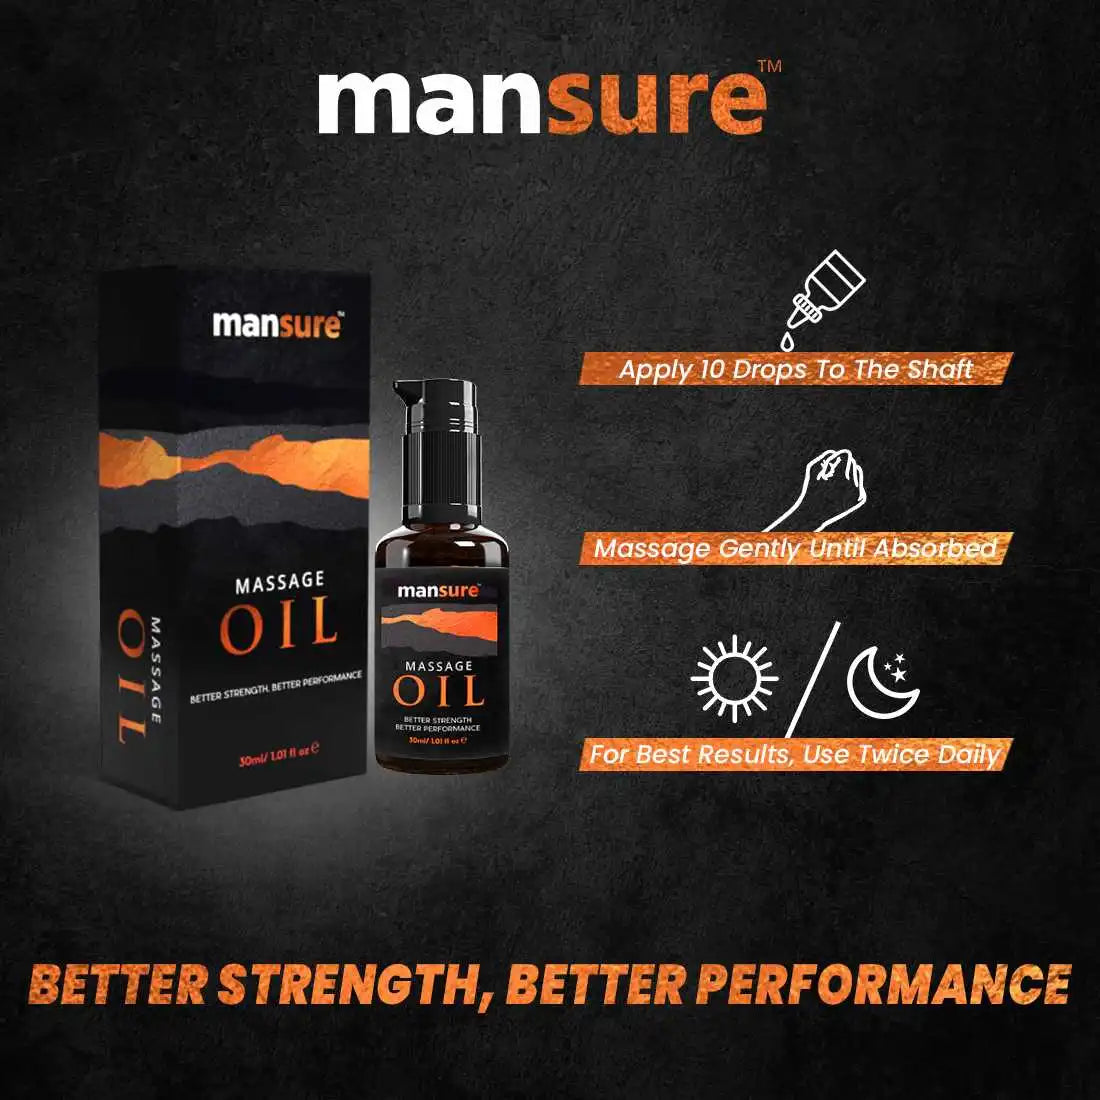 Apply 10 drops of ManSure Massage Oil for Men and Massage Gently. Repeat twice daily.